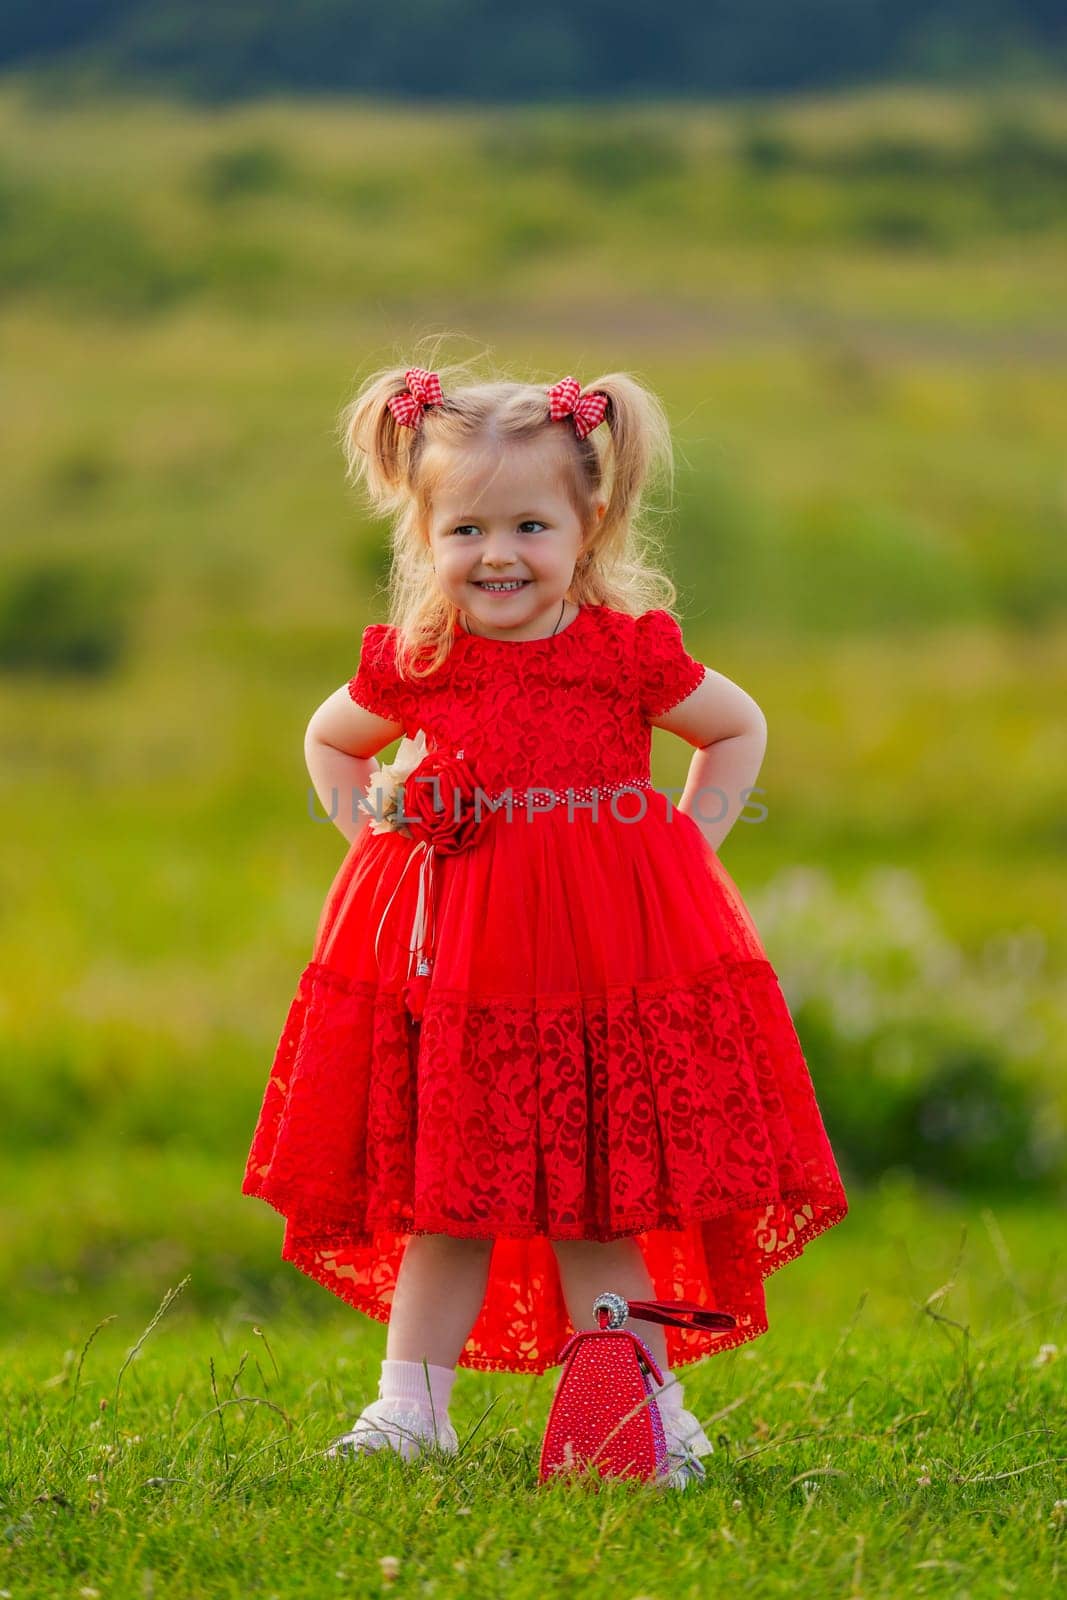 little girl in a red dress walks on the lawn